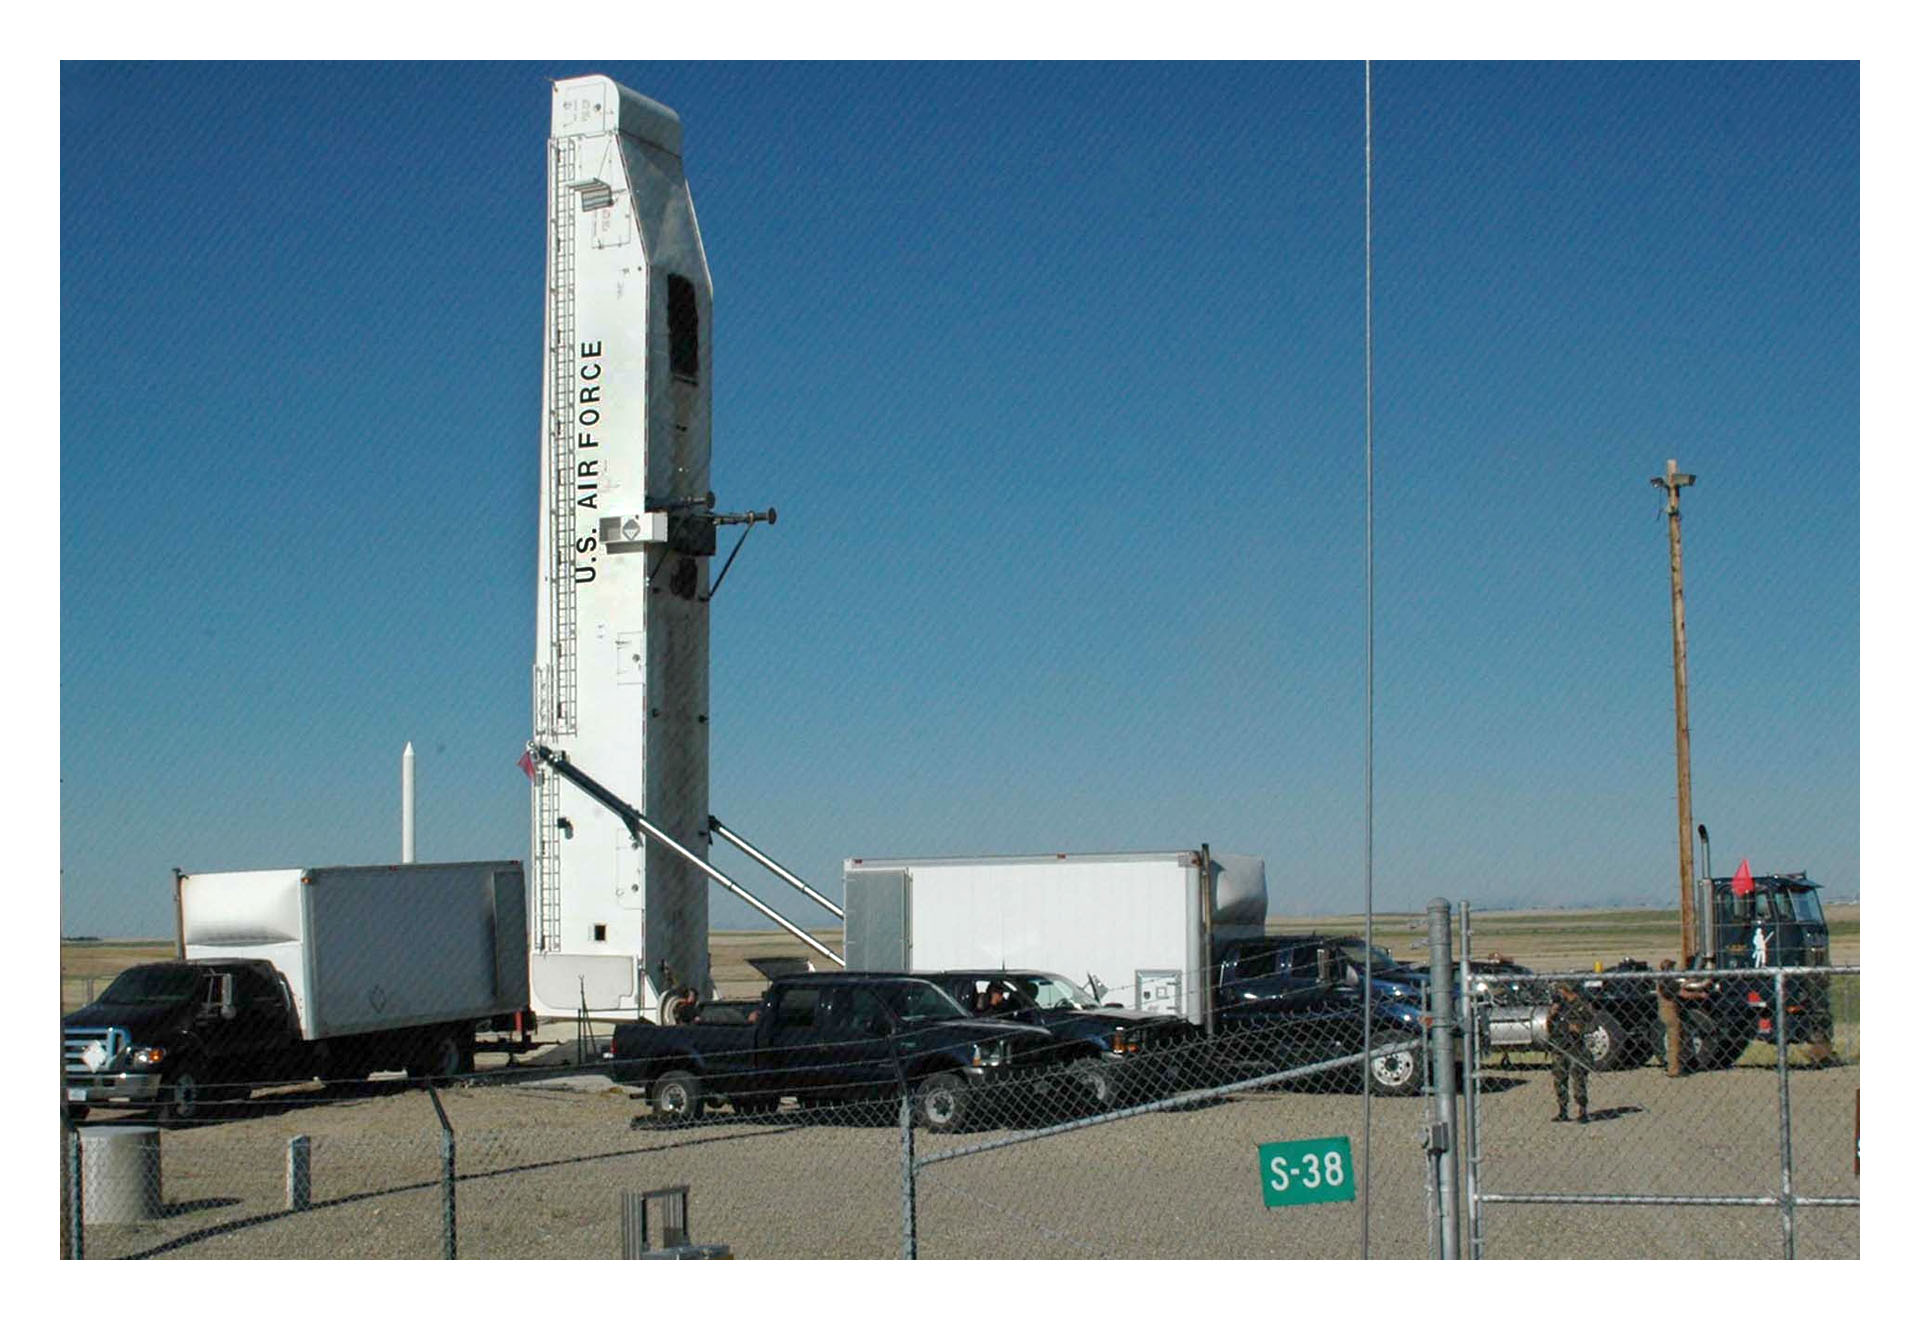 Transport vehicles prepare to move a Minuteman III missile at Malmstrom Air Force Base (U.S. Air Force photo) 